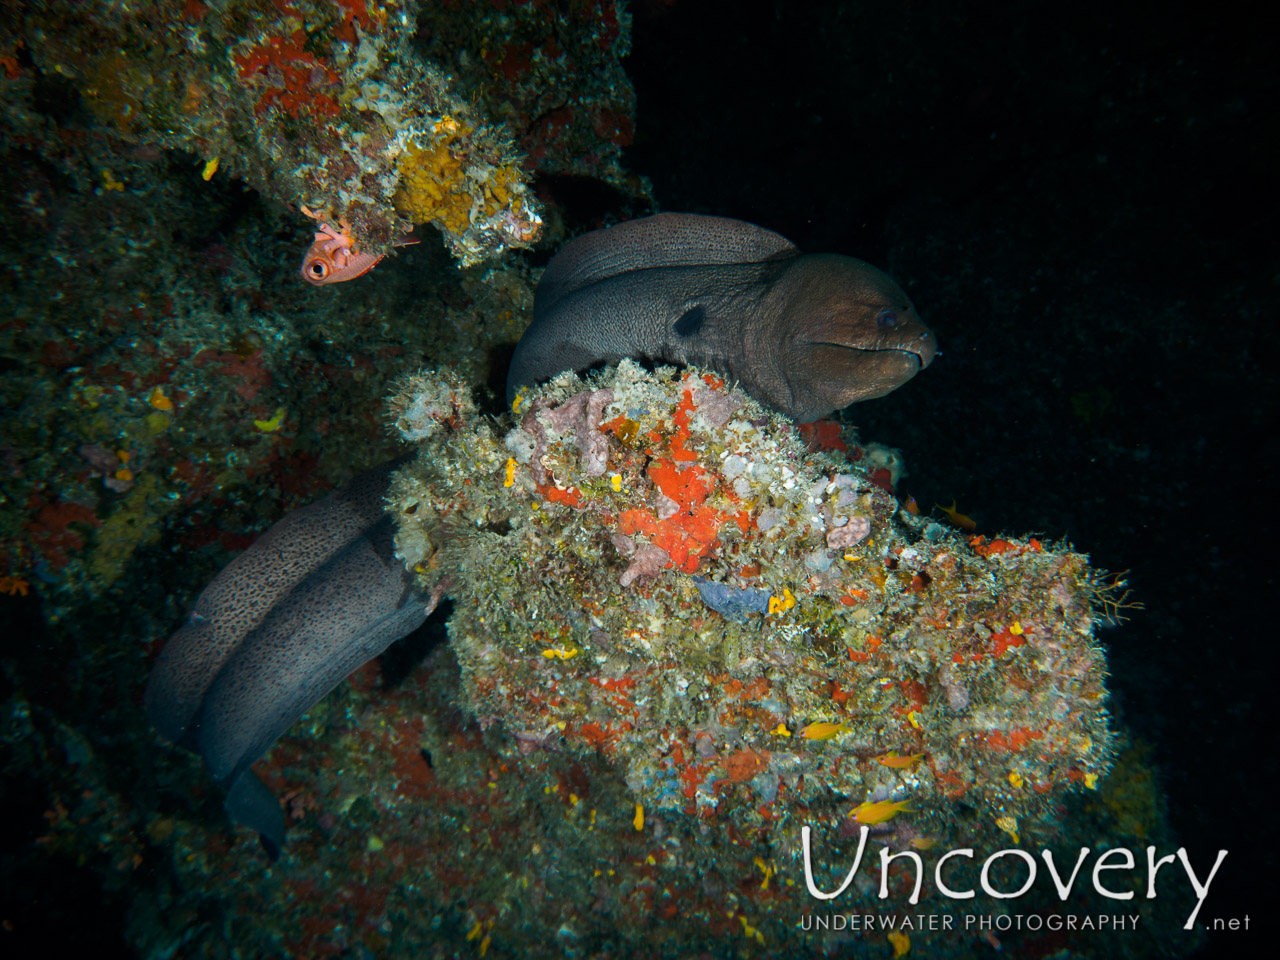 Giant Moray (gymnothorax Javanicus), photo taken in Maldives, Male Atoll, South Male Atoll, Mystery Caves